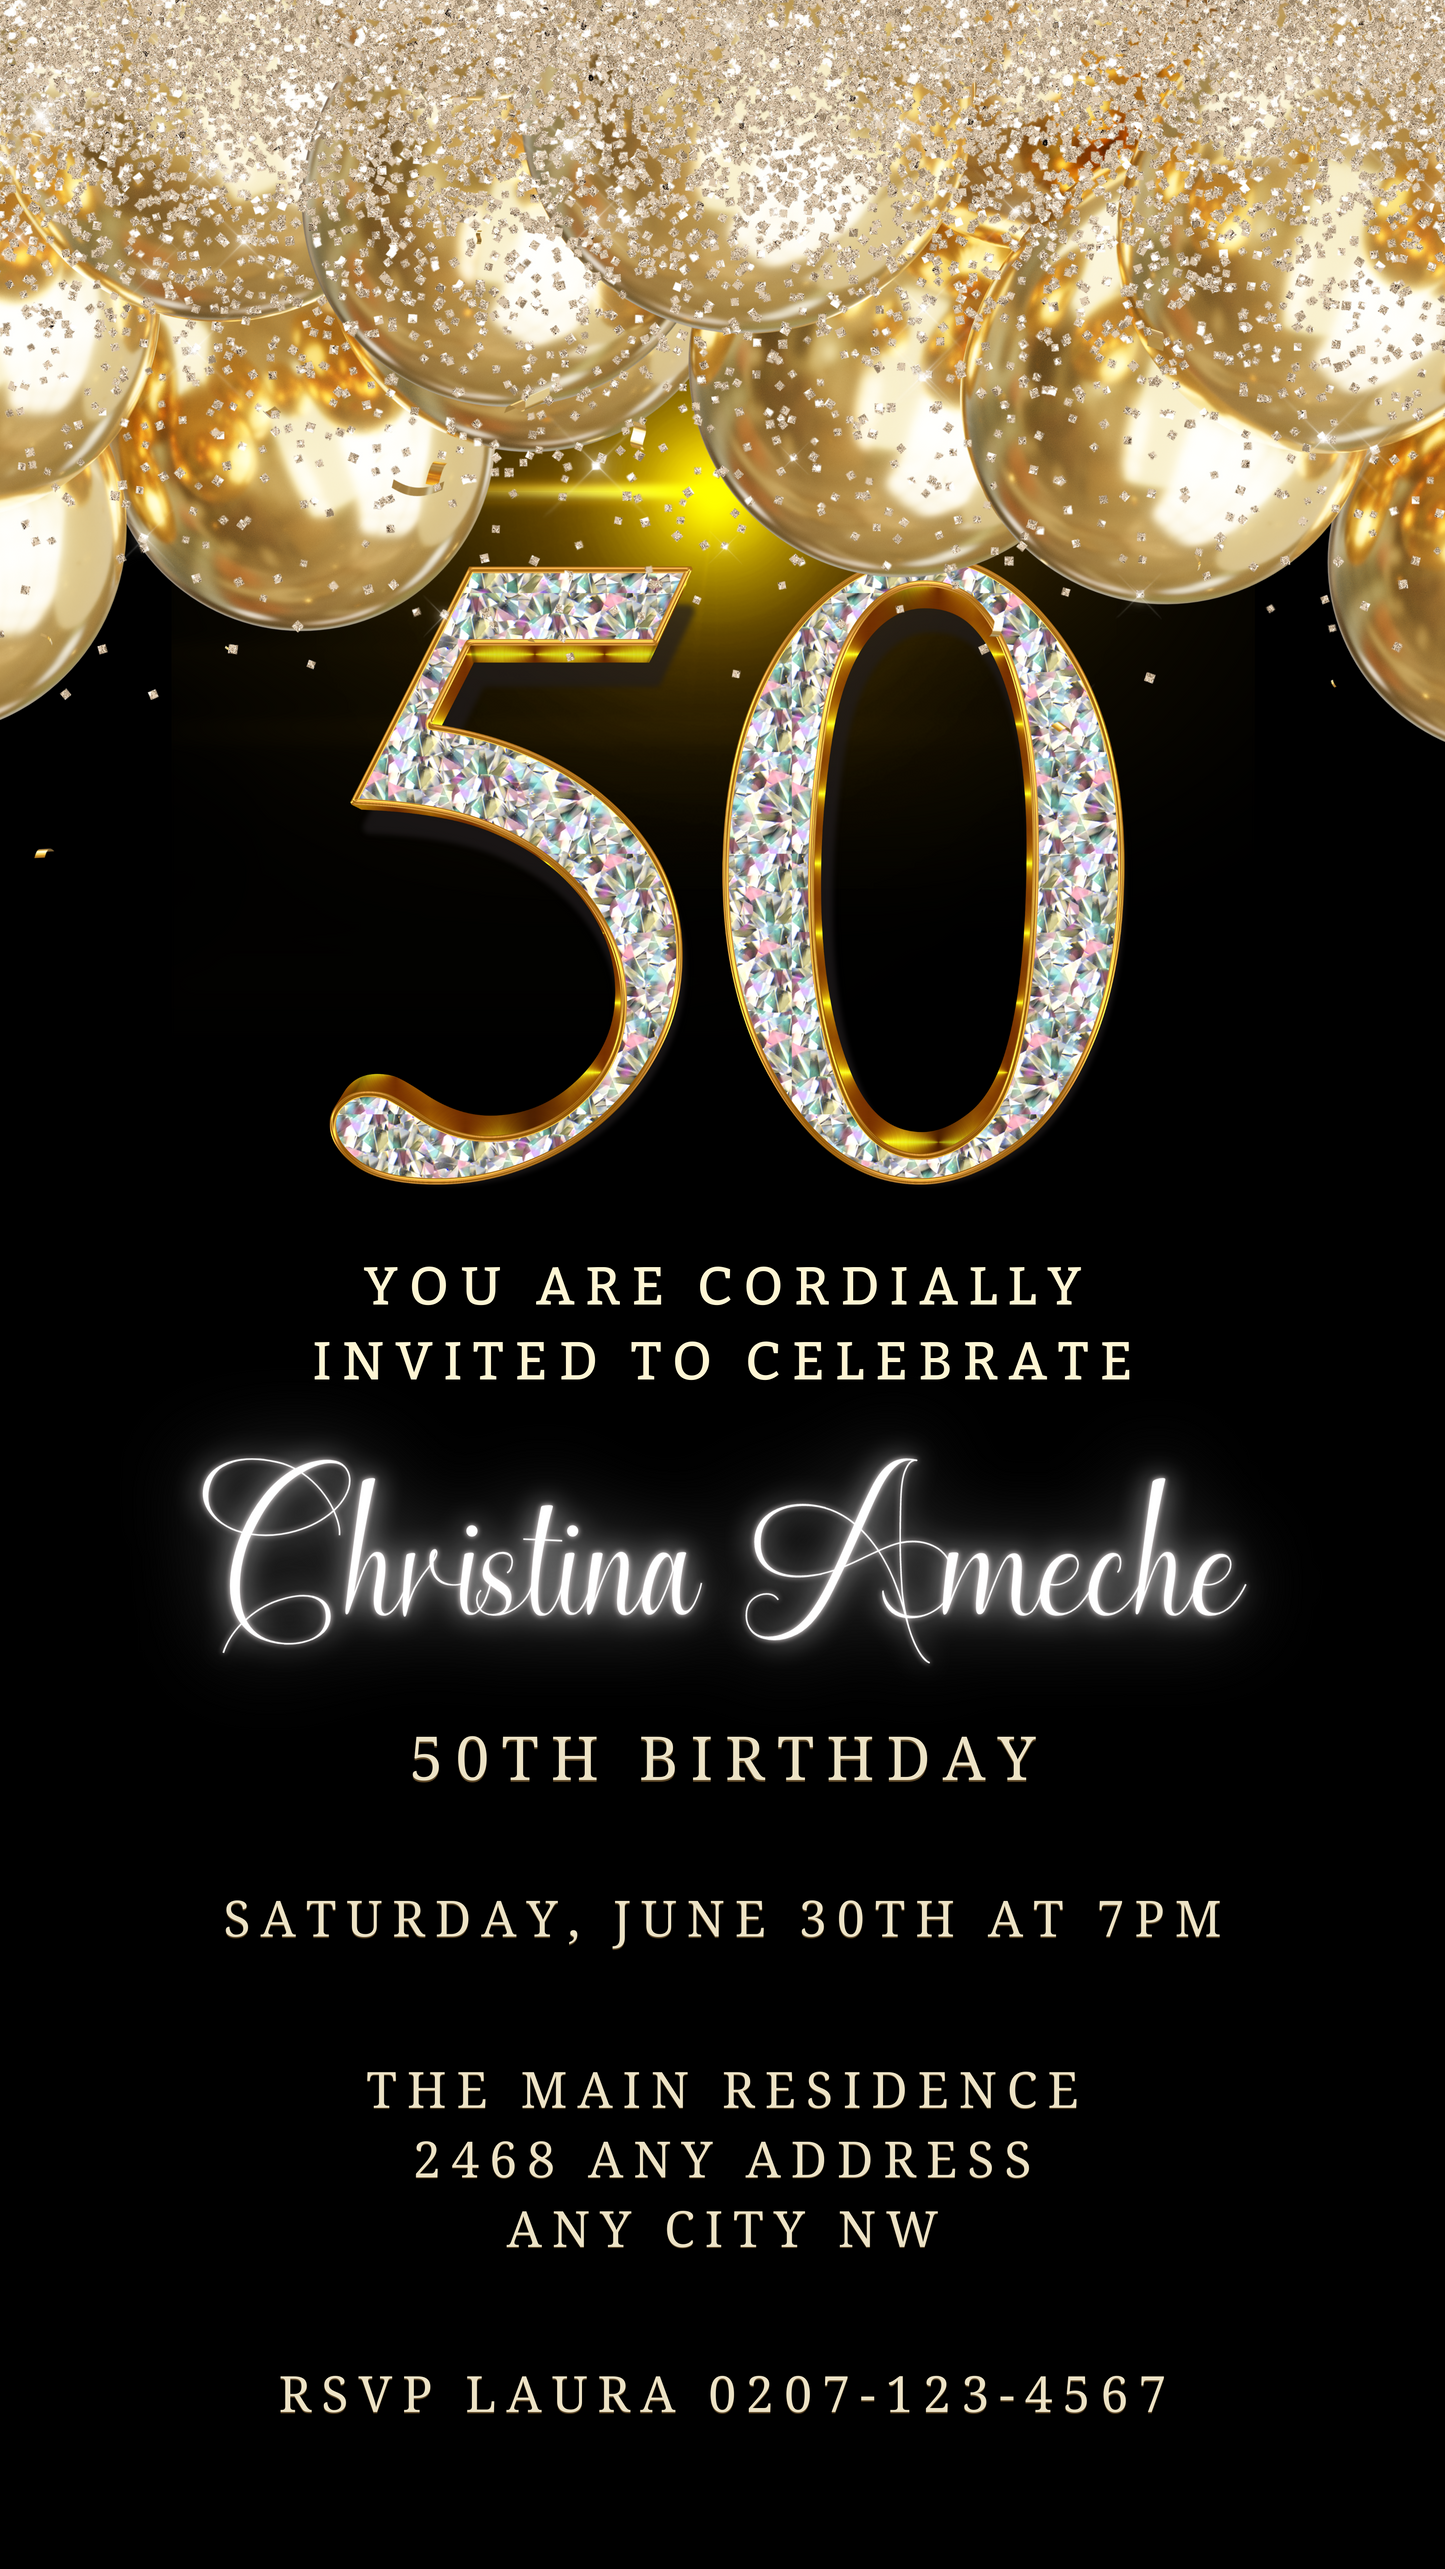 Black and gold 50th birthday digital invitation with balloons and glitter, customizable via Canva for electronic sharing.